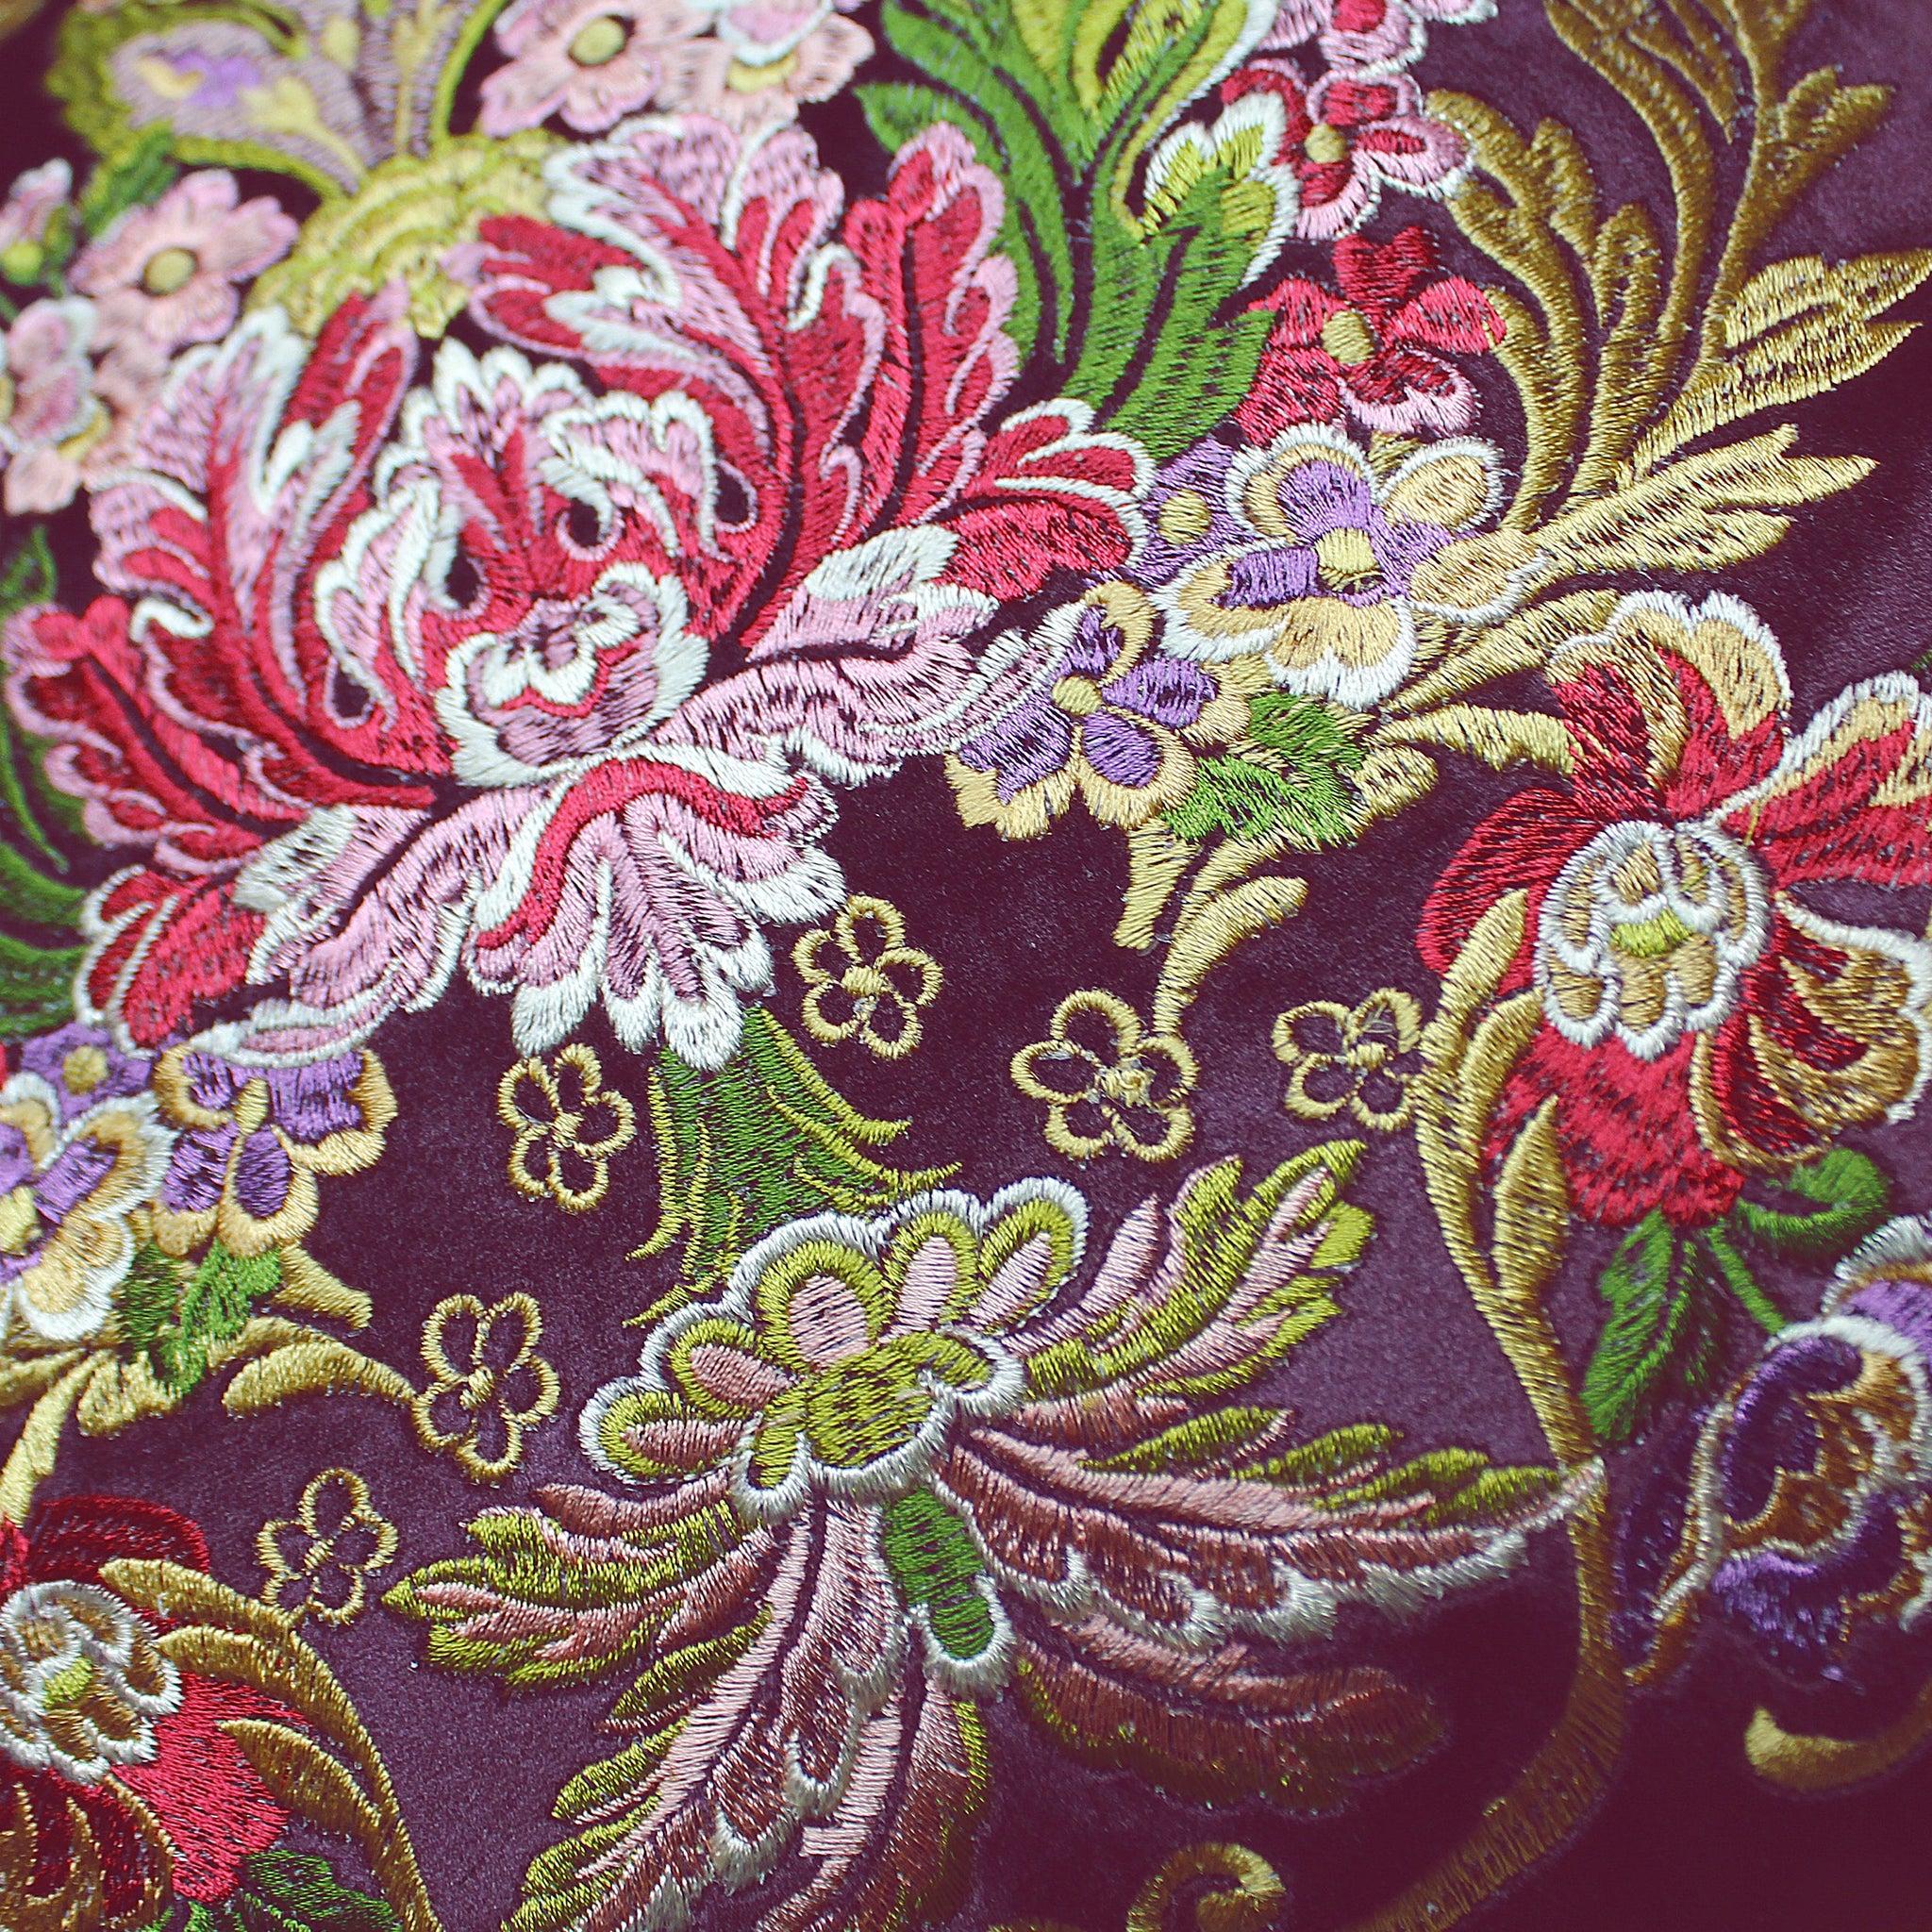 Gold Green Purple Red Floral Embroidery Baroque Style Cushion Cover